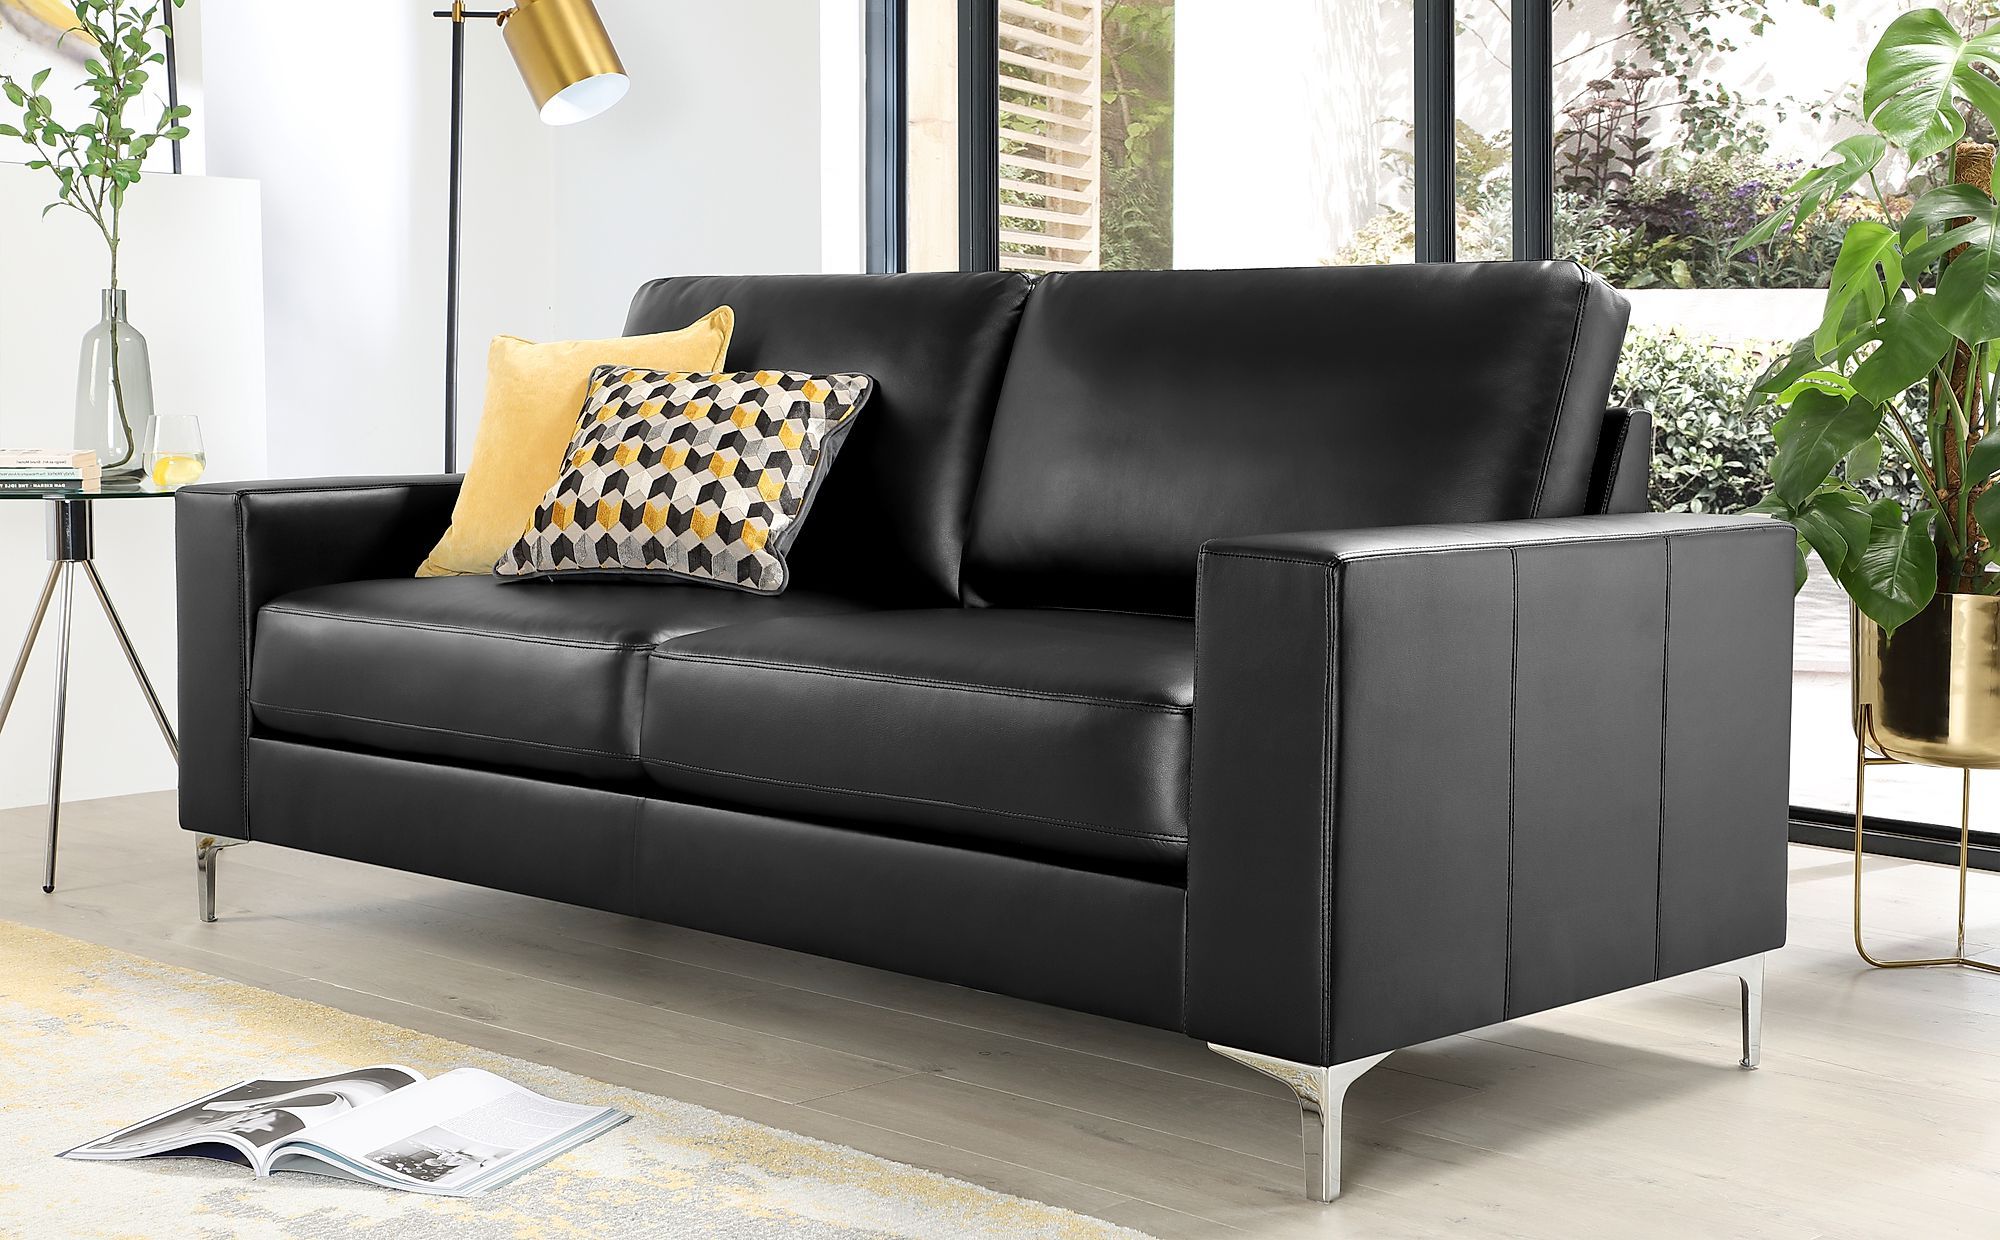 Baltimore Black Leather 3 Seater Sofa | Furniture Choice In Right Facing Black Sofas (View 10 of 20)